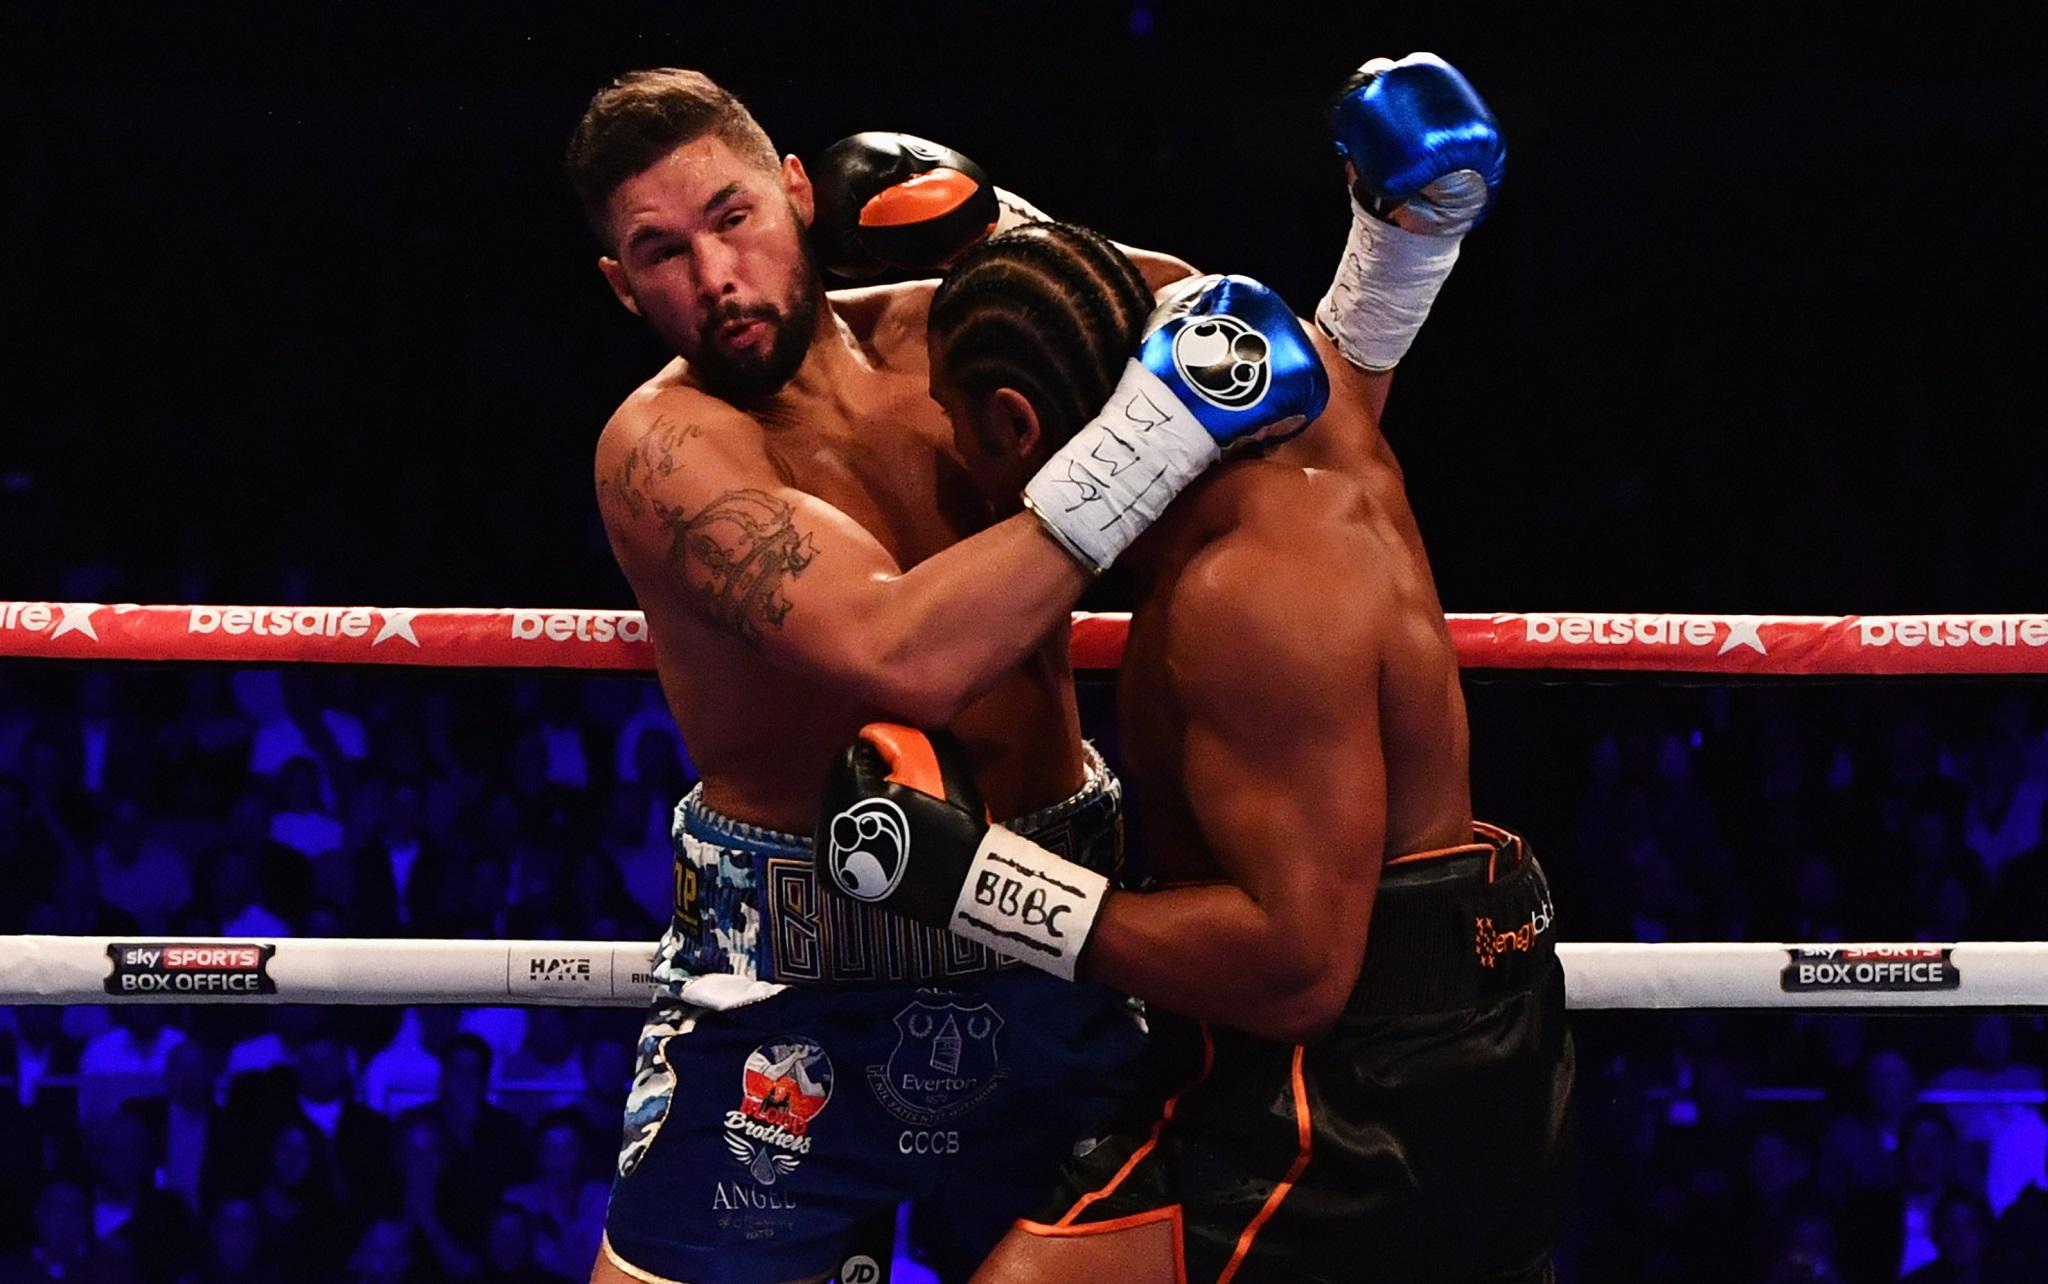 Tony Bellew is hit with a right hook from Daid Haye